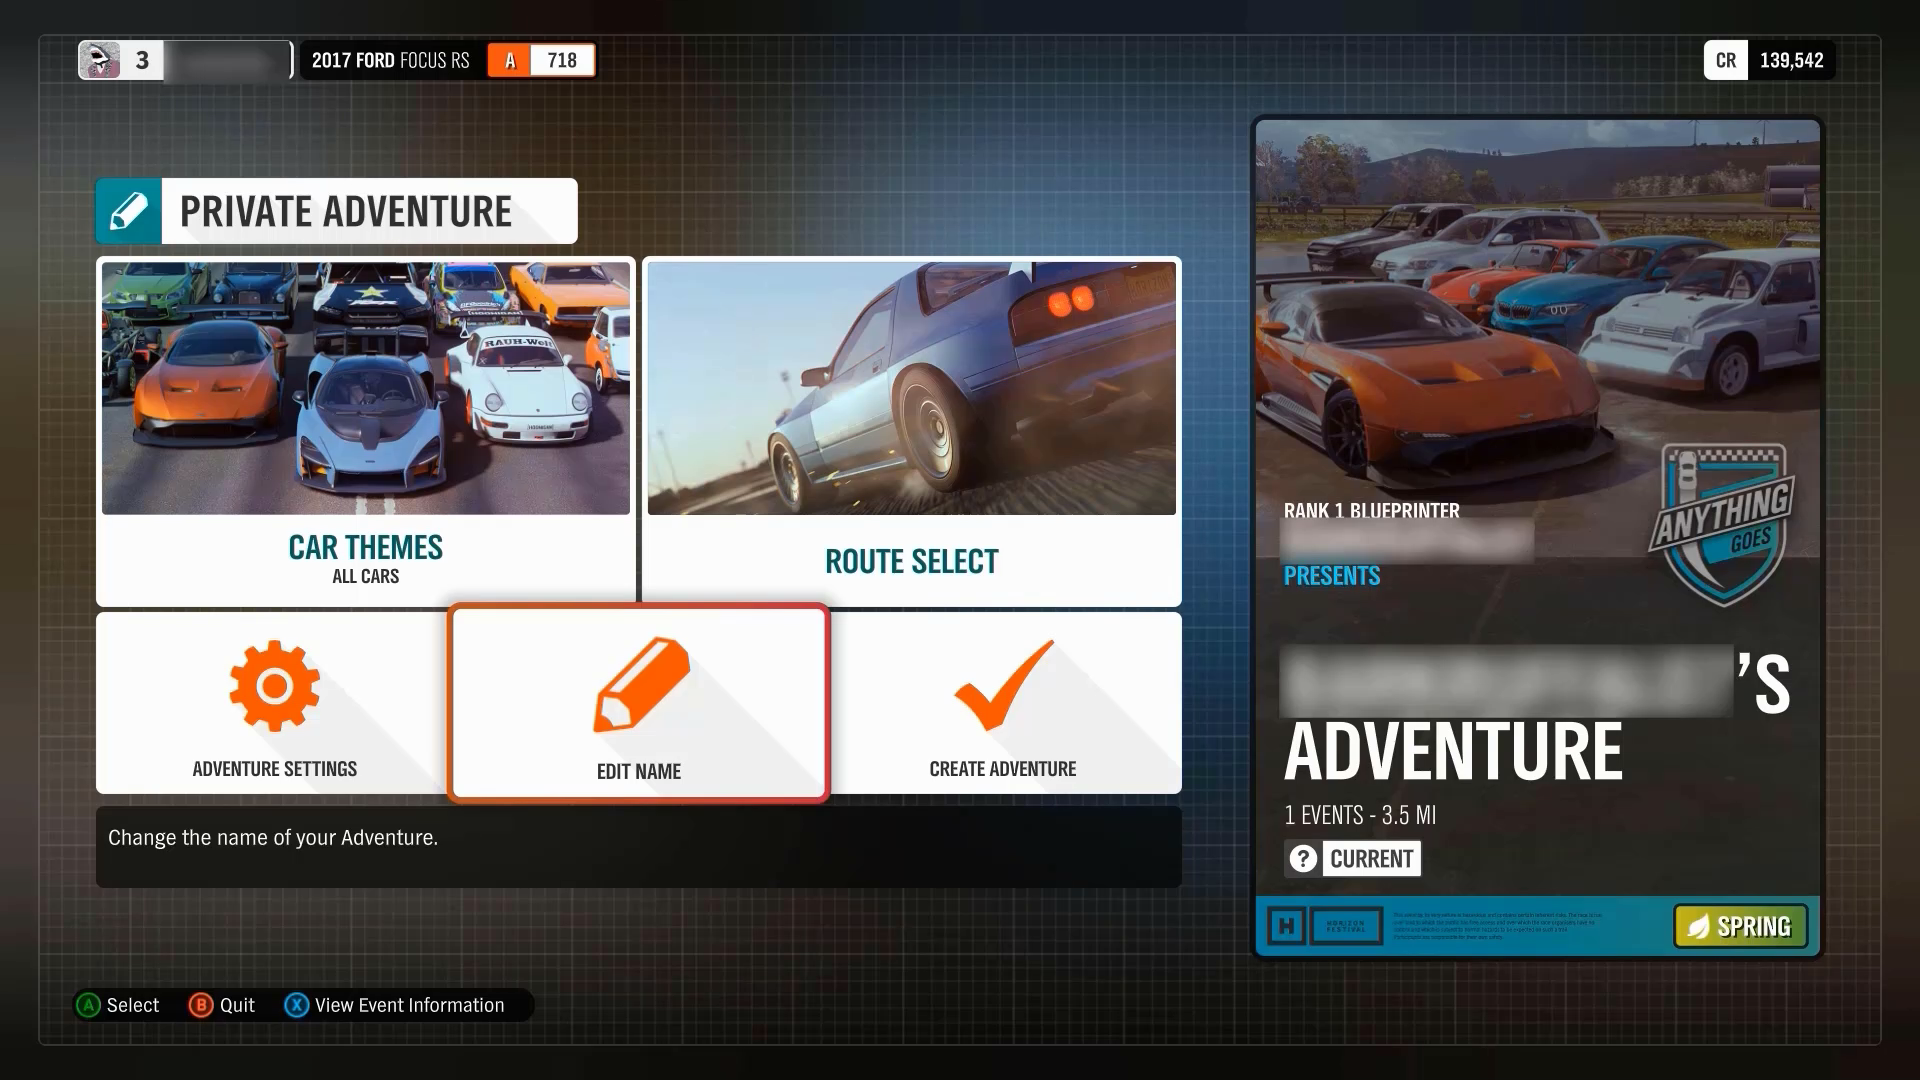 A screenshot from Forza Horizon 4, showing the "Private Adventure" screen. "Edit Name" is selected, and a description that explains the function is displayed.